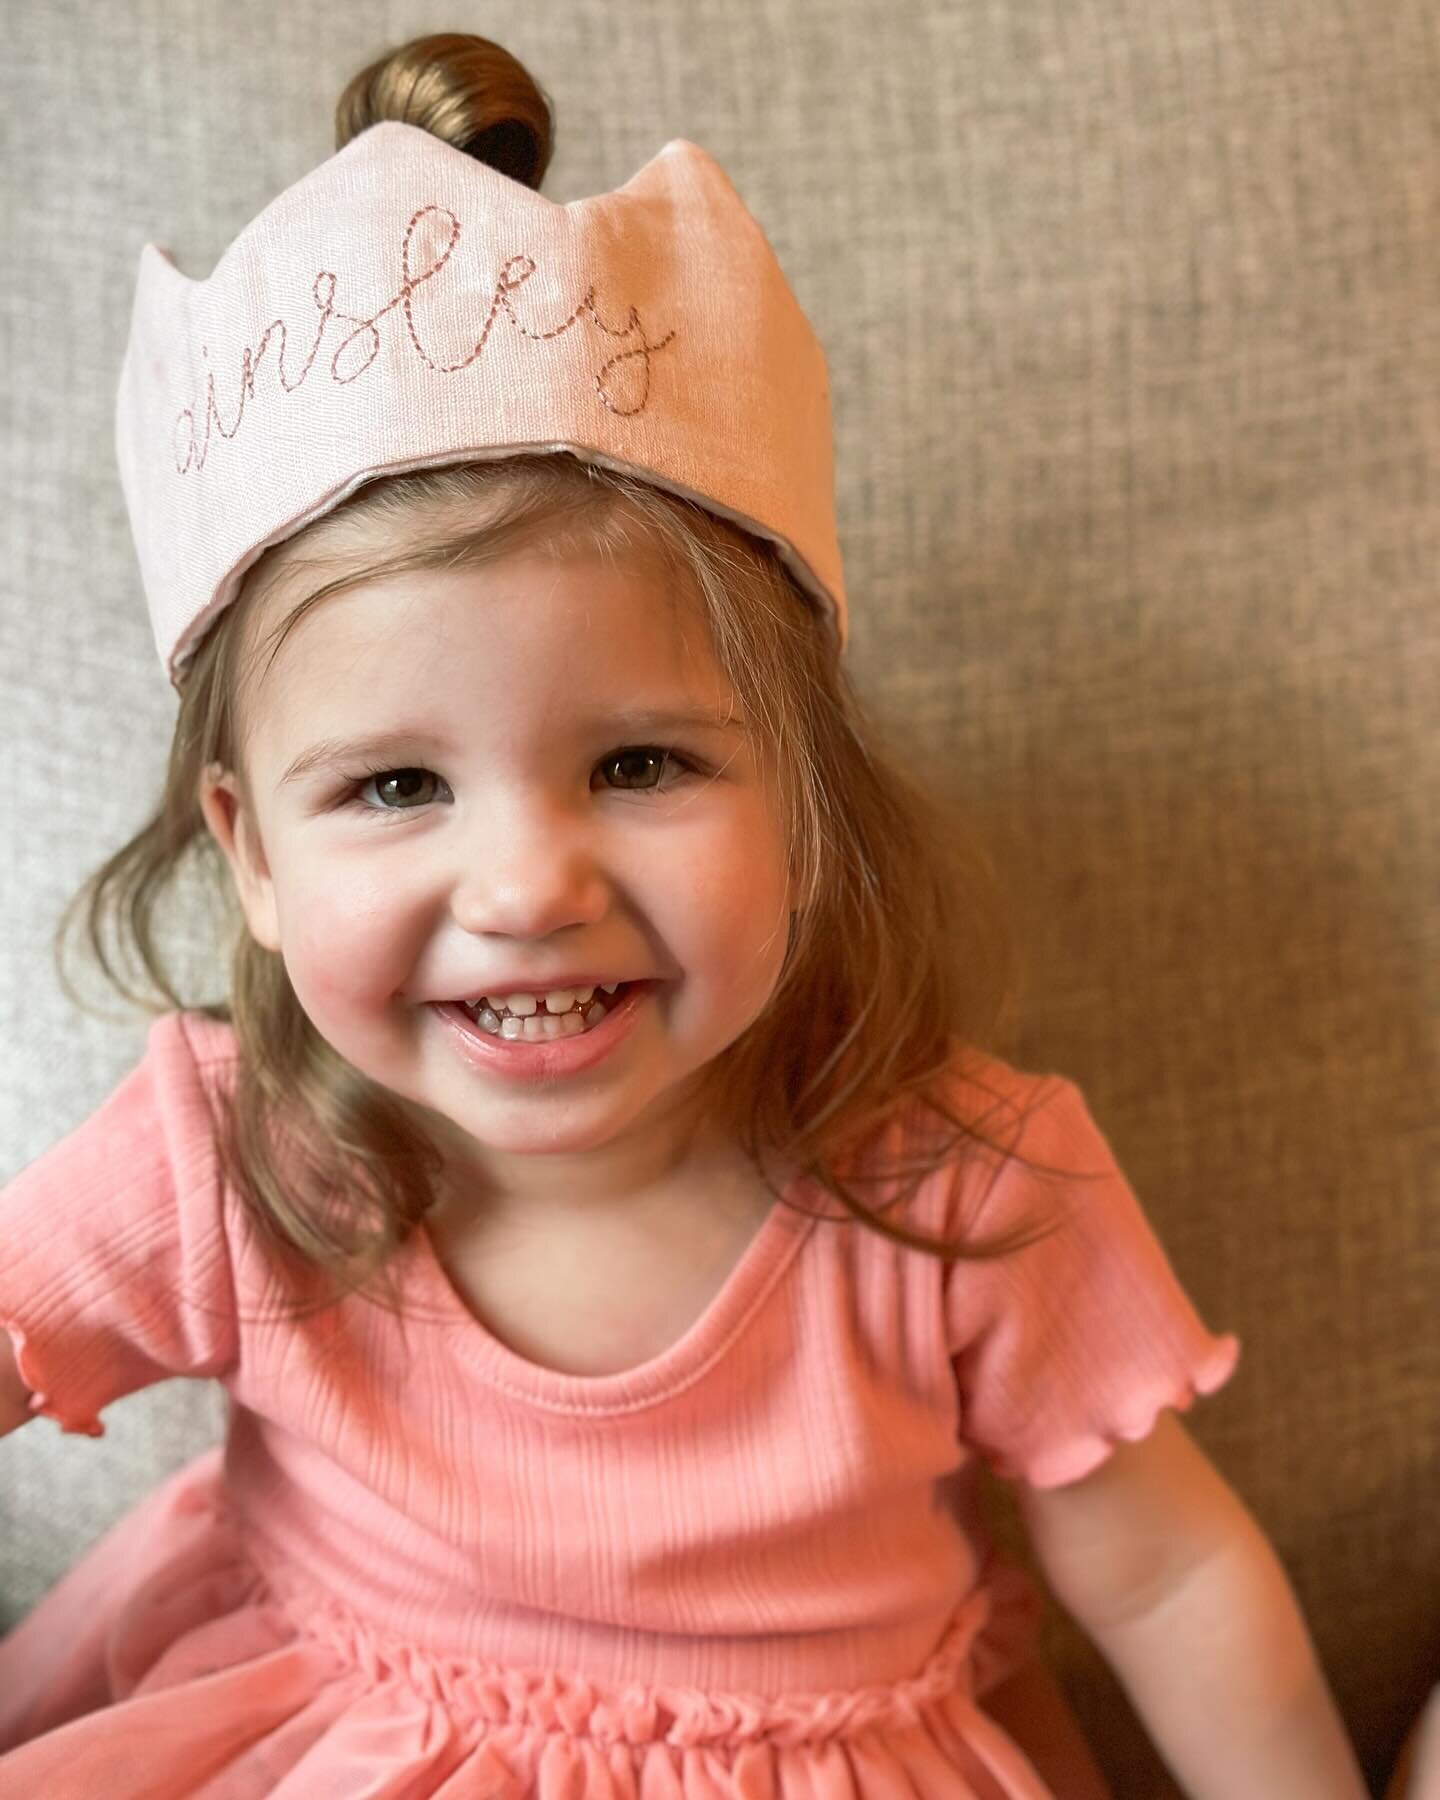 it&rsquo;s so hard to believe our little sunshine is already 2 years old! 🥰 she&rsquo;s spunky, and wild, and snuggly, and goofy, and feisty, and sweet, and brings us all so much joy!!

we thank God for you, our sweet Ainsley girl! 

#birthdaygirl #